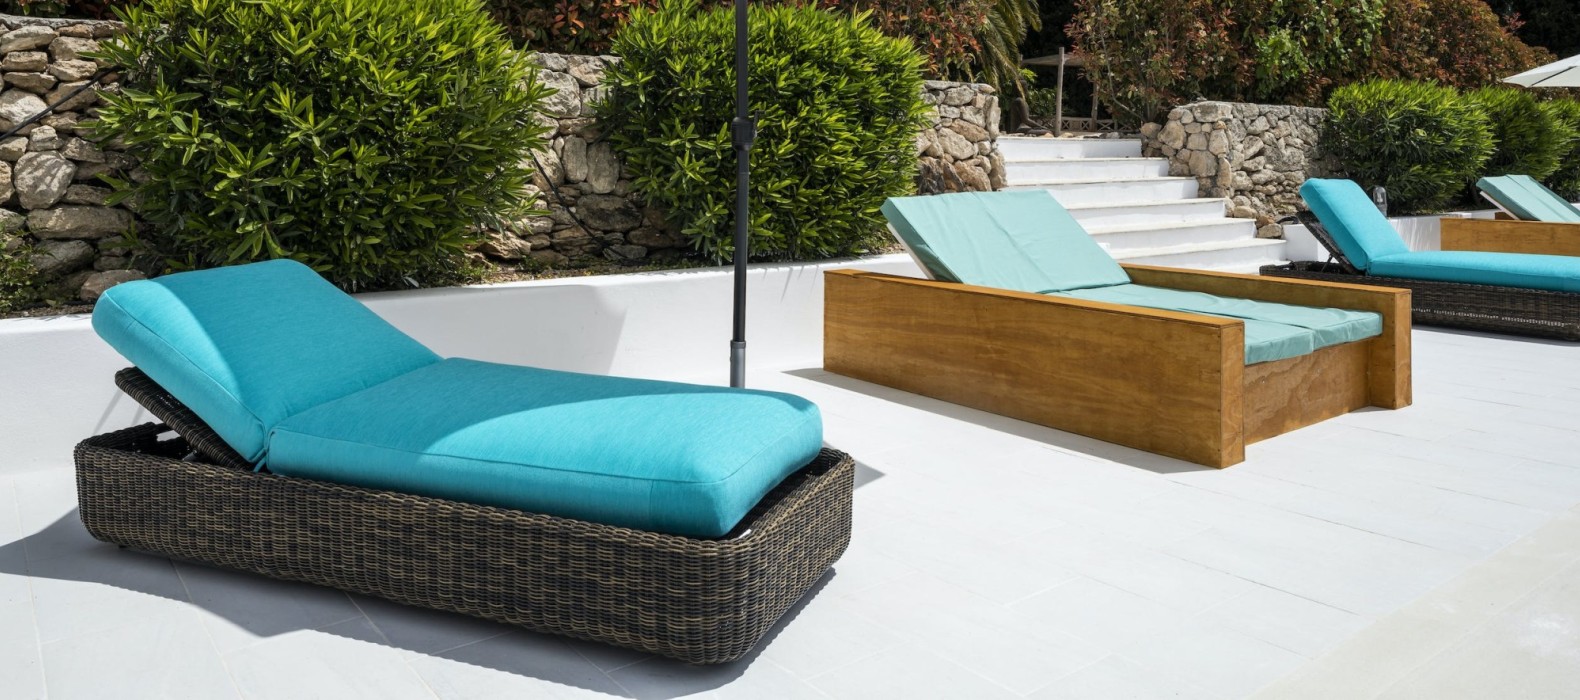 Sun loungers at the pool of Villa Evenfall in Ibiza